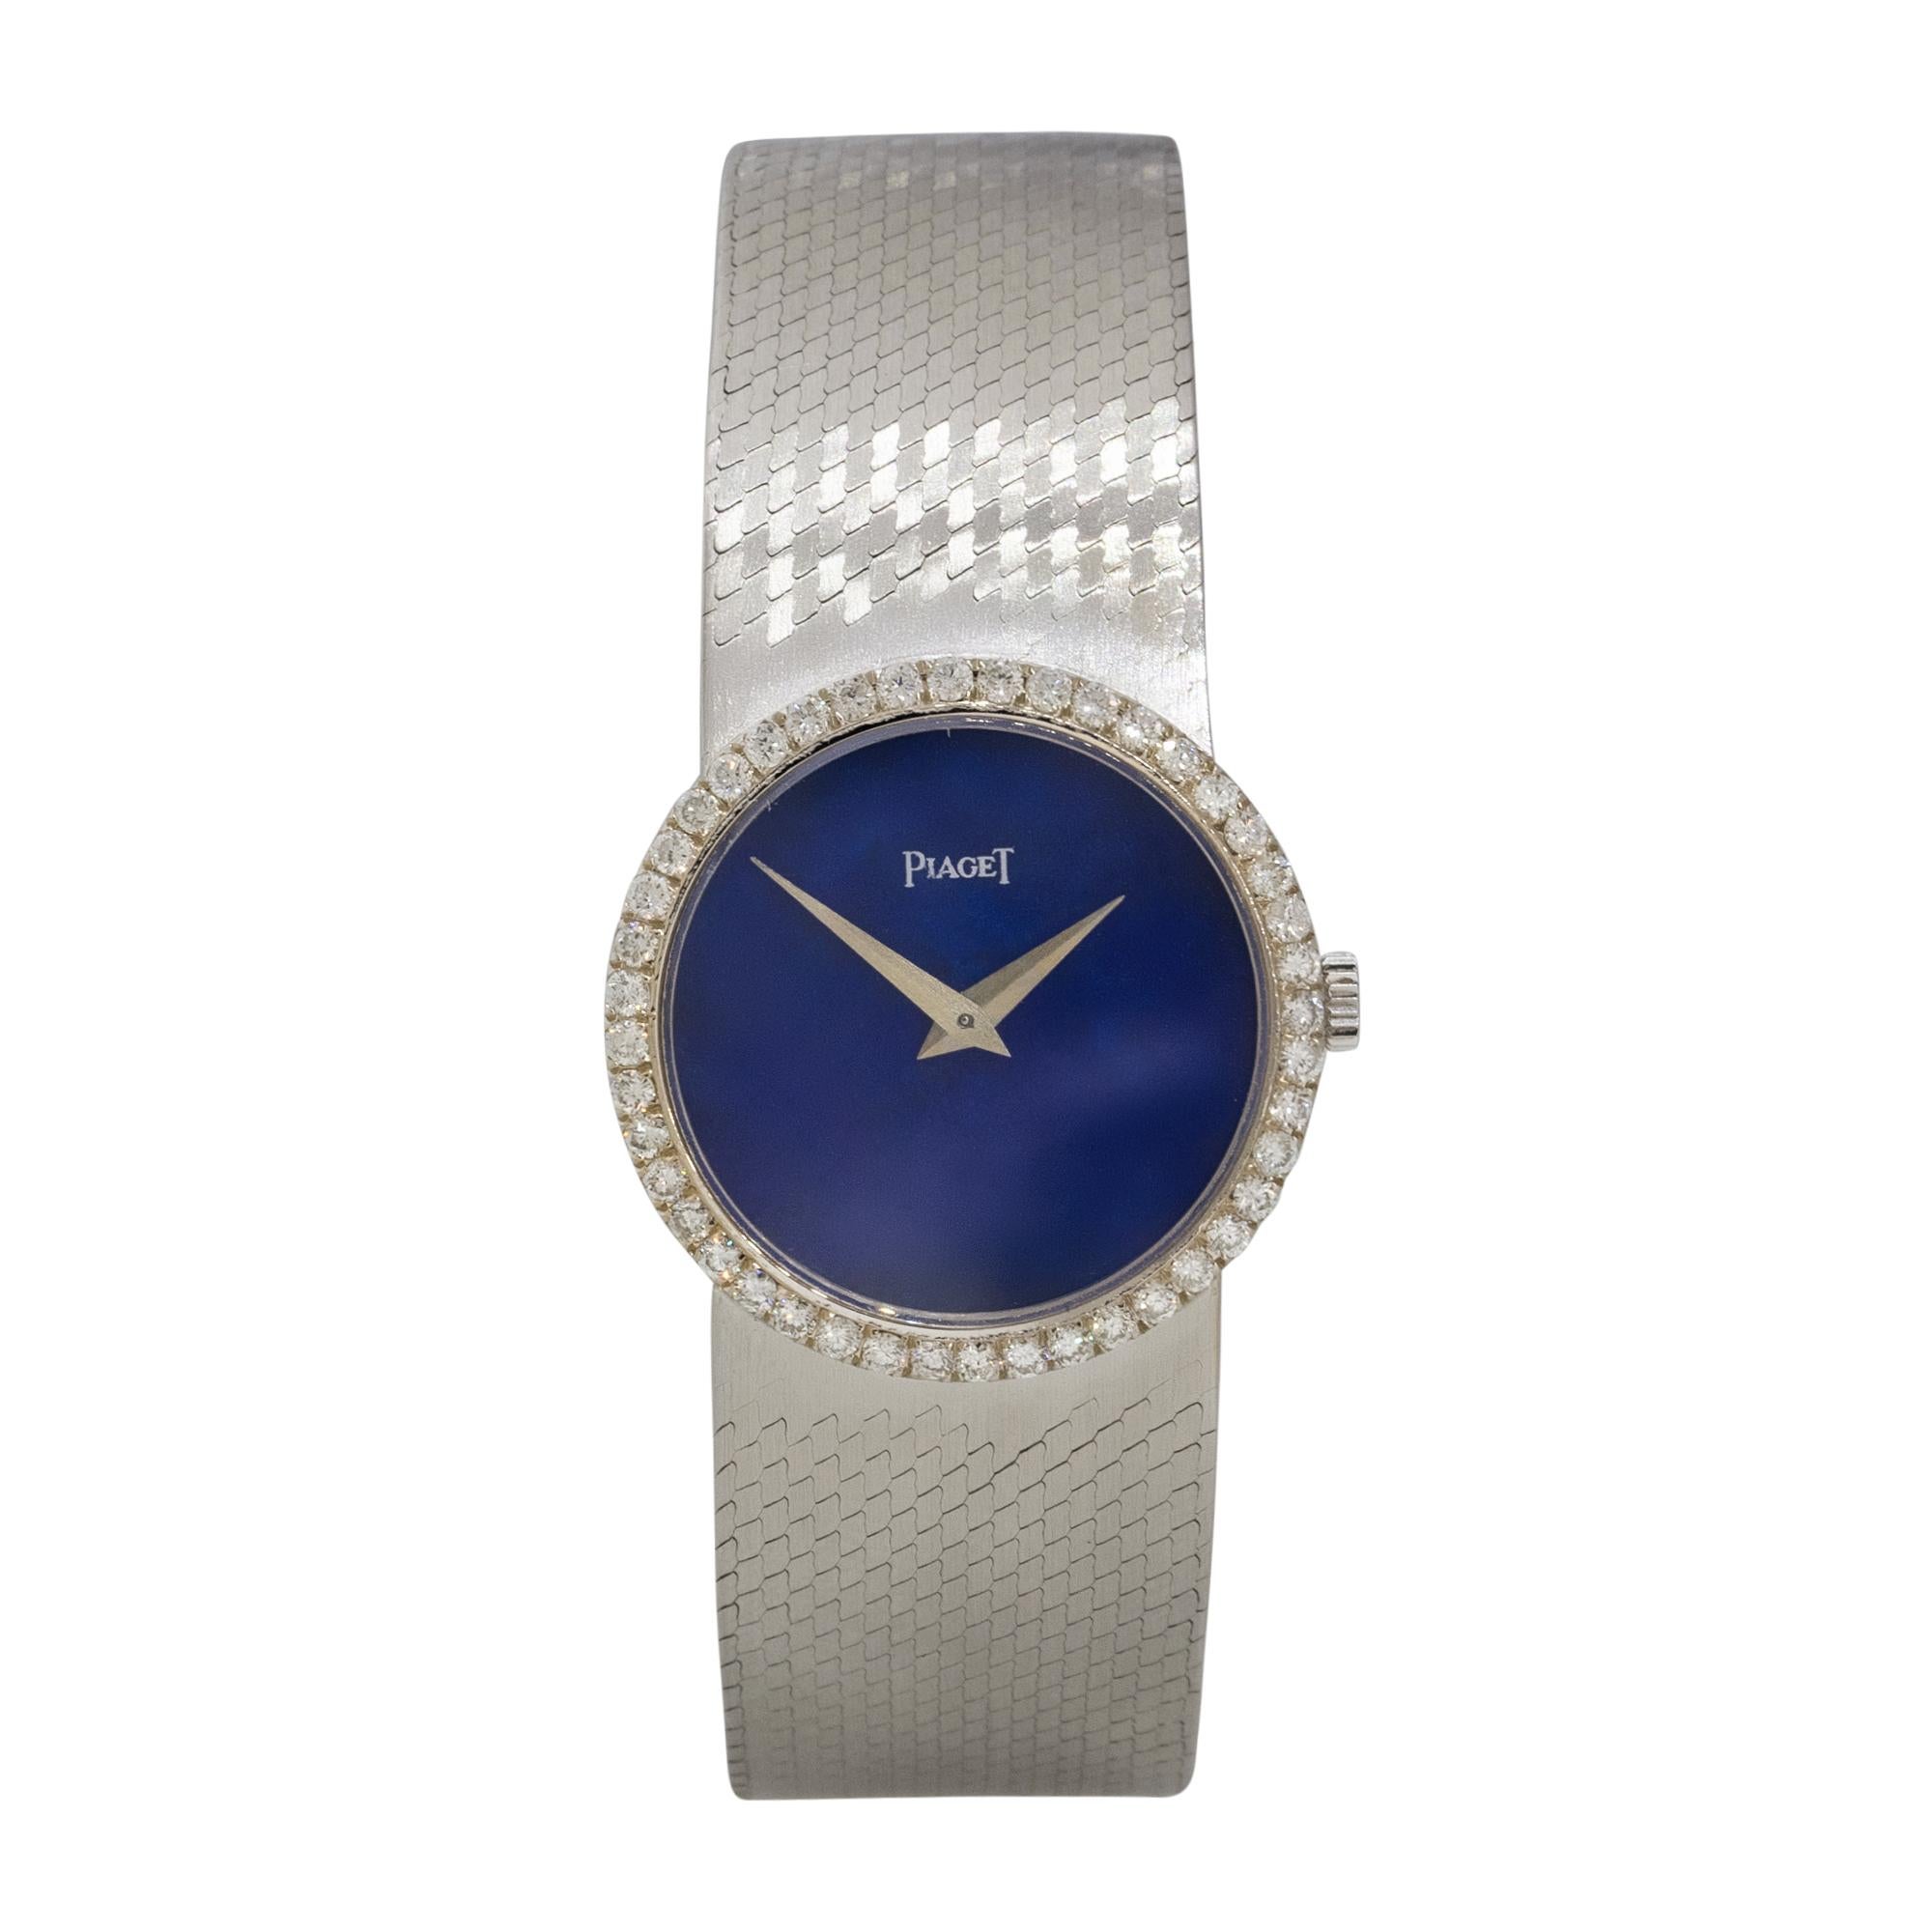 Brand: Piaget
Case Material: 18k White Gold
Case Diameter: 24mm
Crystal: Sapphire Crystal
Bezel: 18k White Gold Diamond Bezel
Dial: Blue Lapis dial with white gold hands
Bracelet: 18k White Gold bracelet
Size: Will fit a 5.5